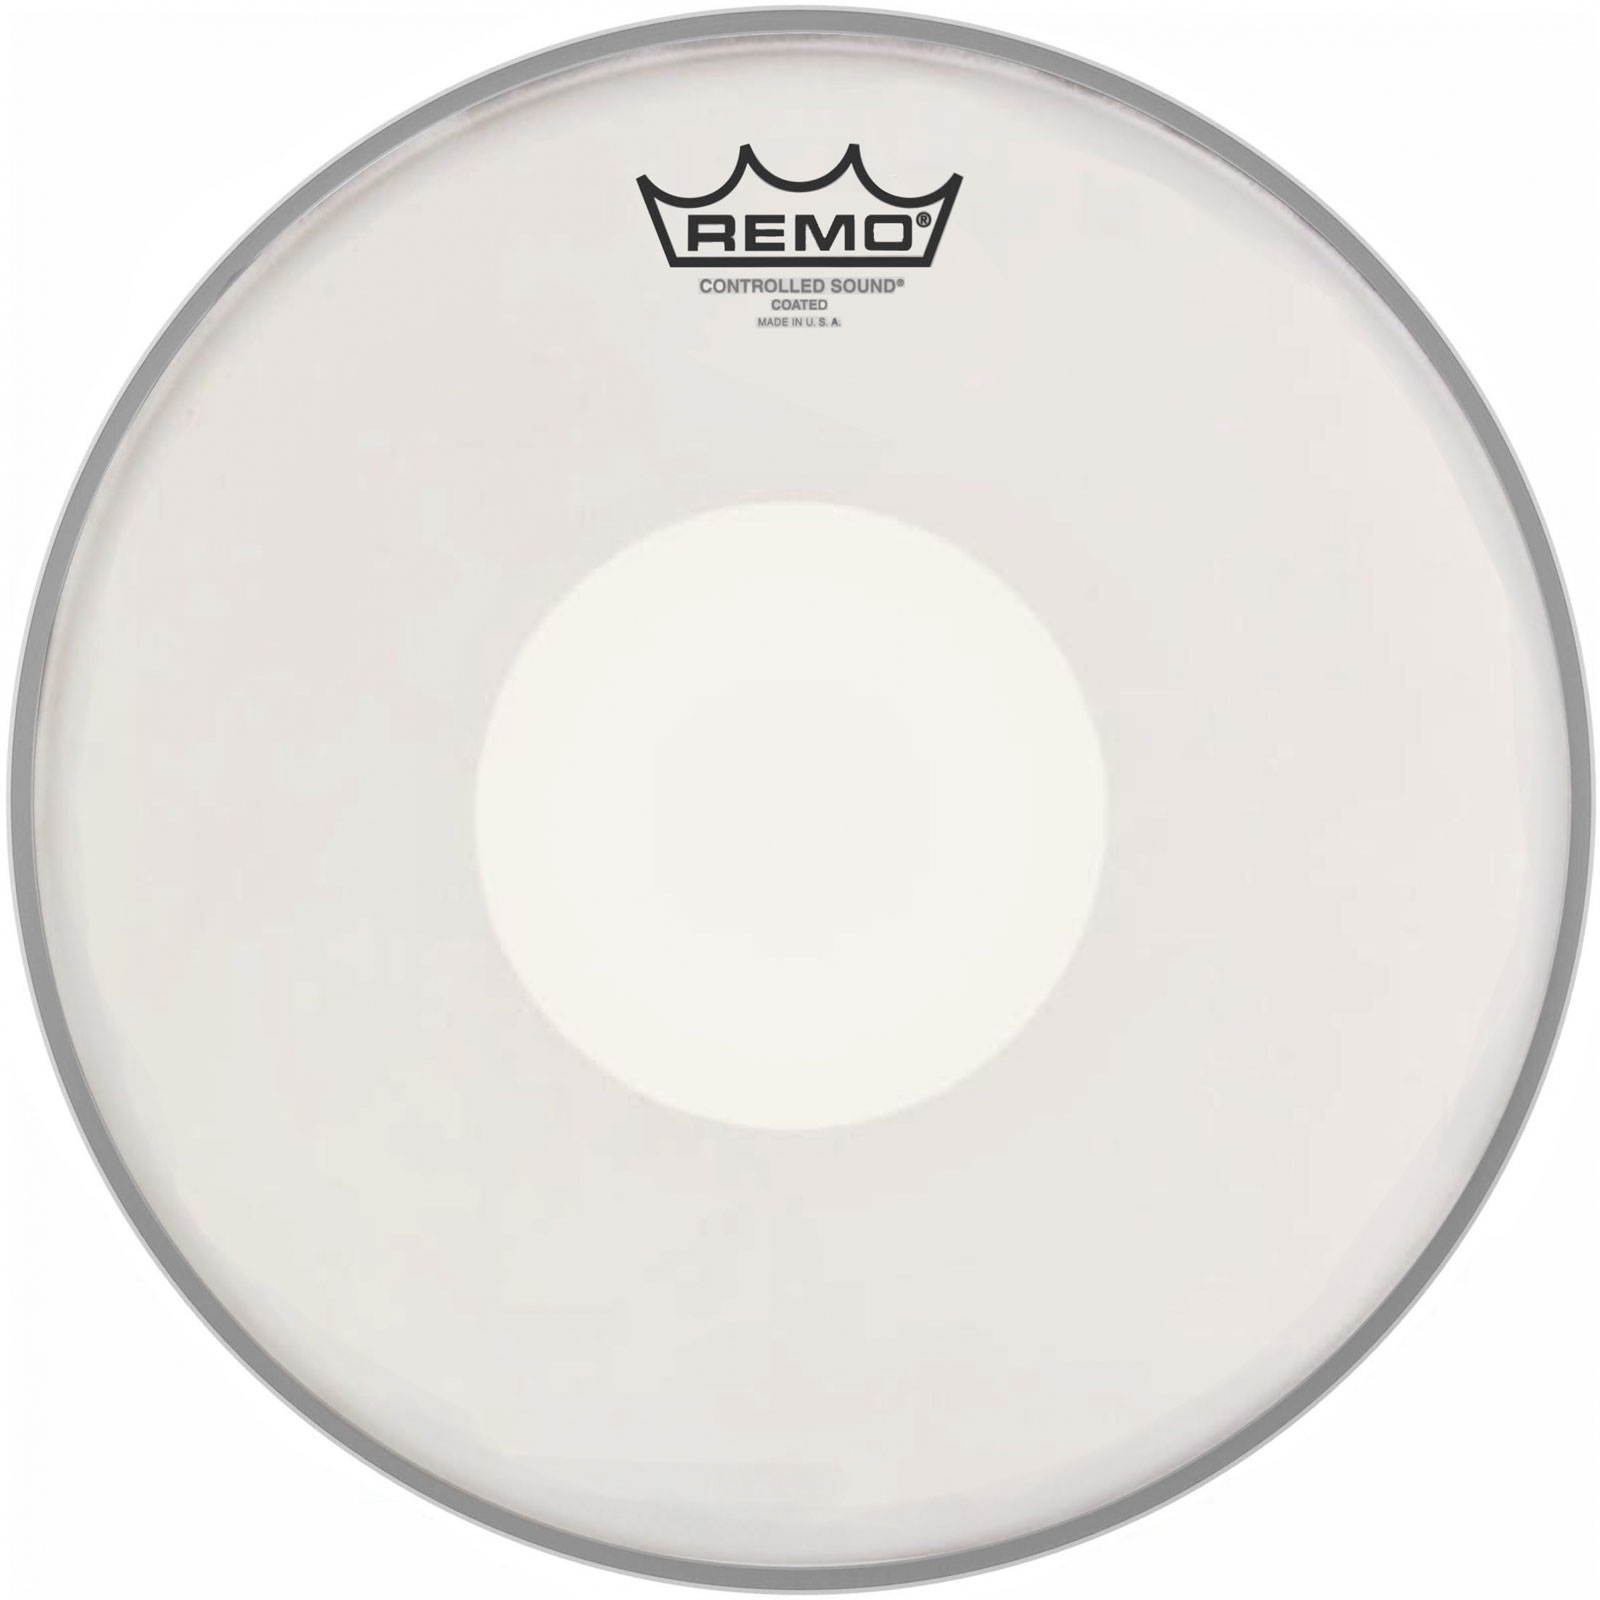 REMO CS-0114-00 CONTROLLED SOUND SABLEE ROND BLANC 14